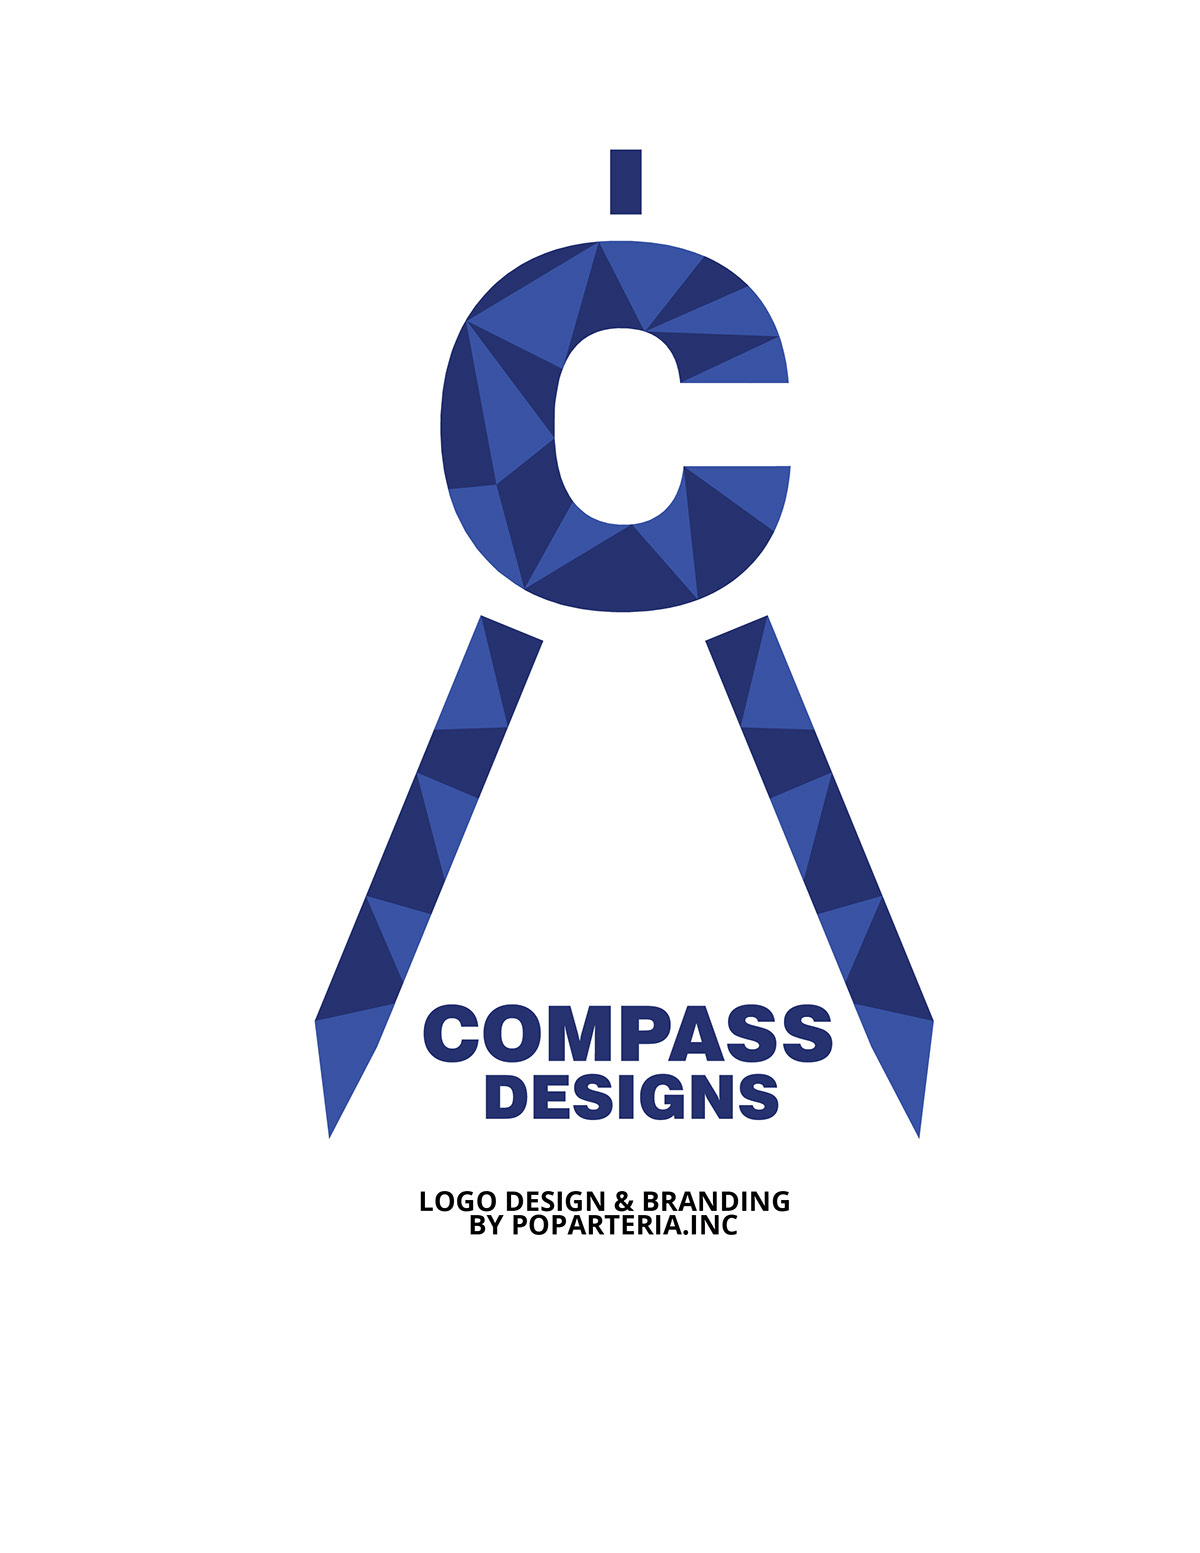 Logo Design blue prints compass swiss drawings Structural firm wacom hand drawn ullustrator photoshop